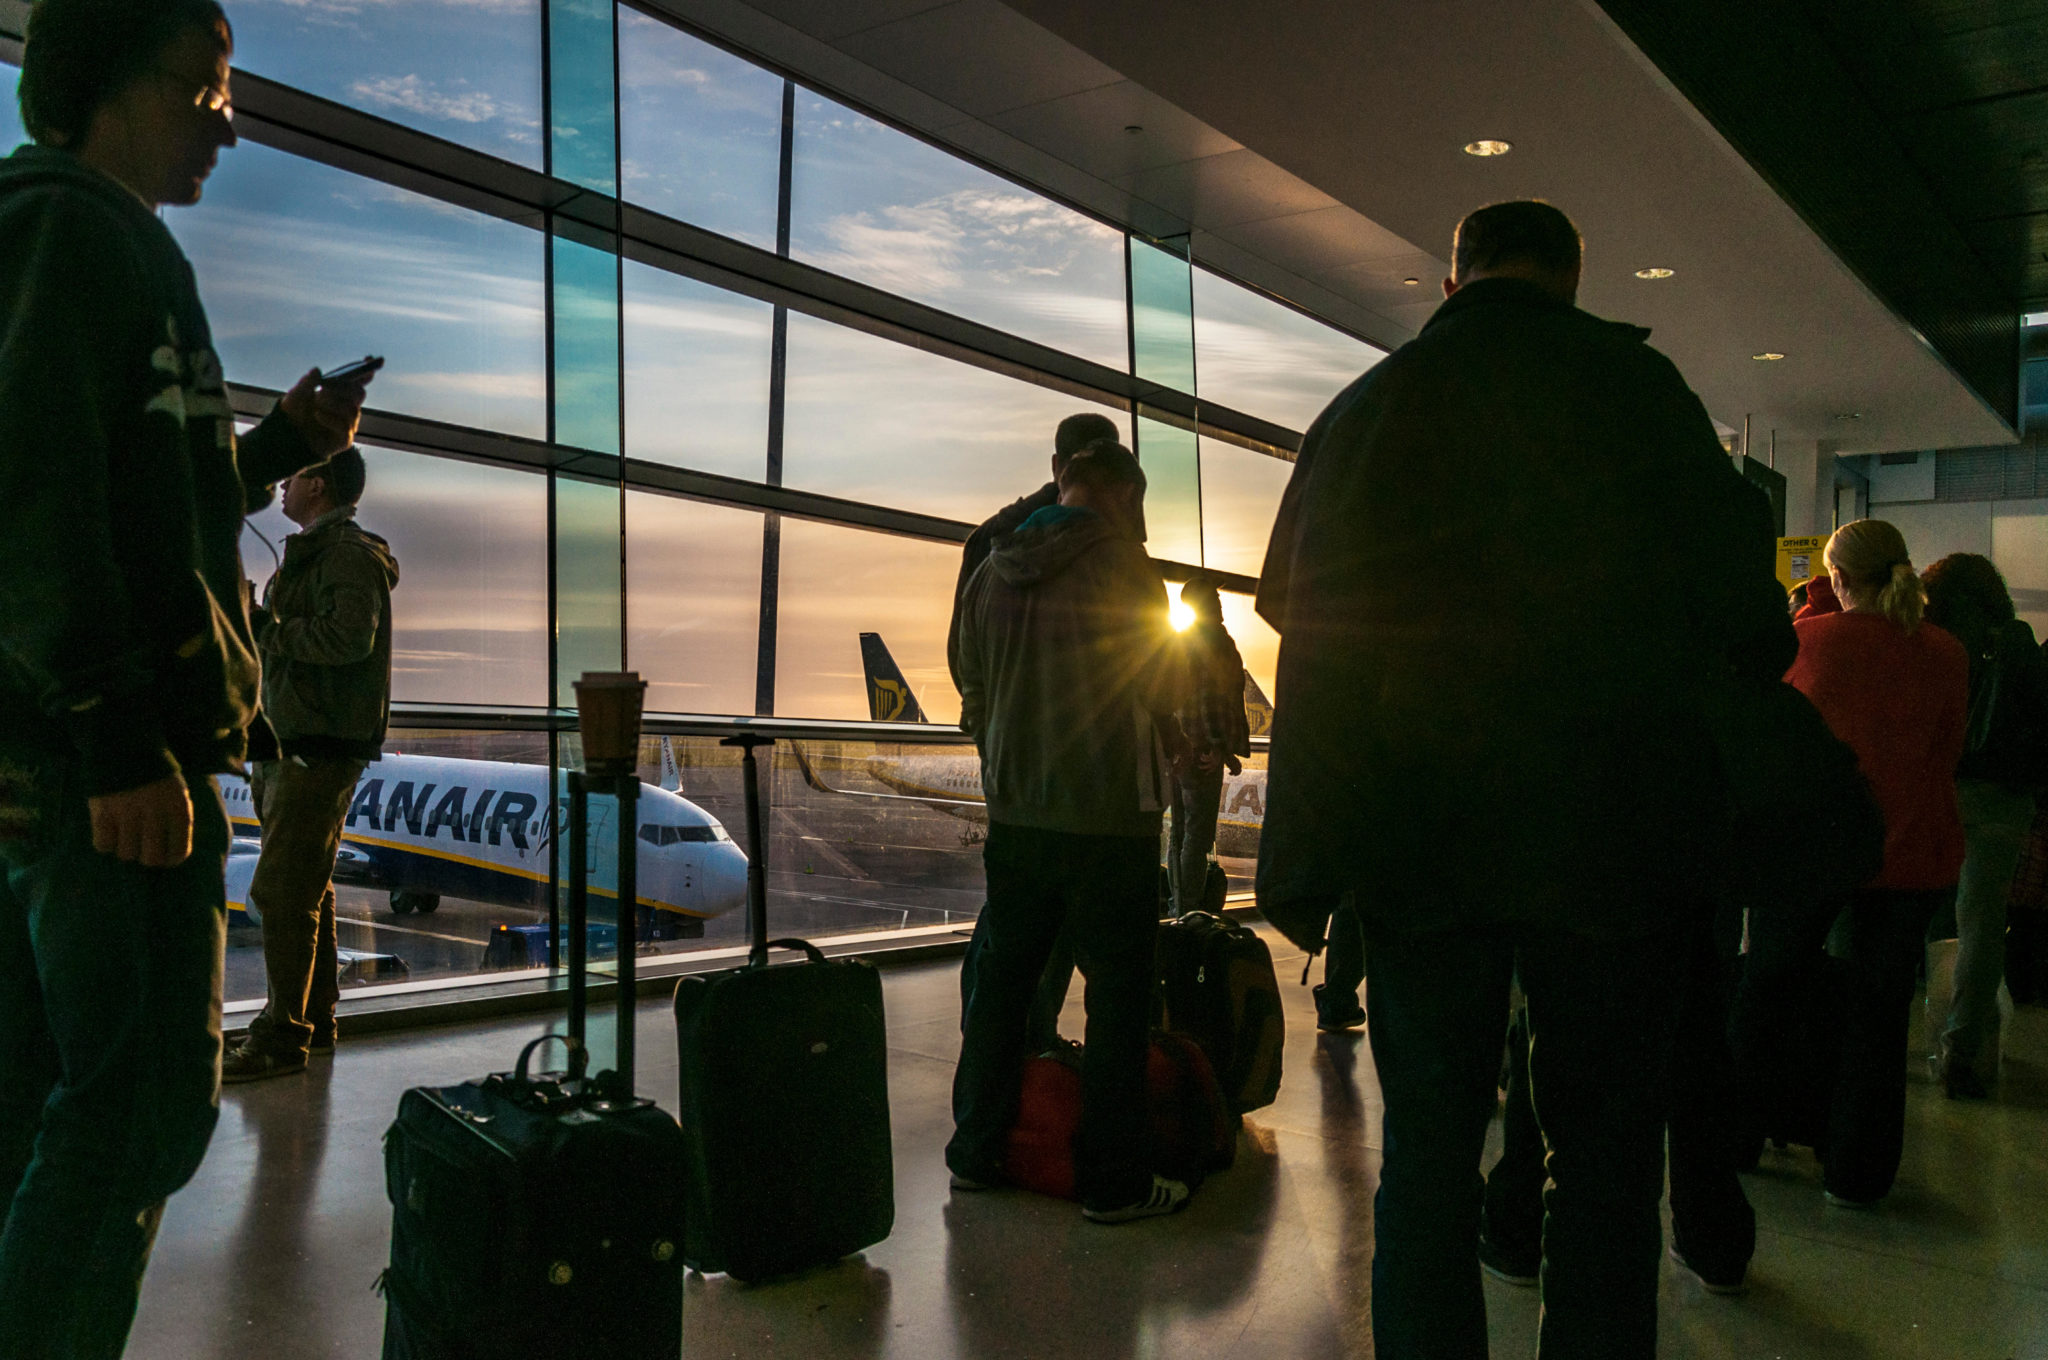 Passengers wait to board an early morning Ryanair flight at Dublin Airport in May 2012.